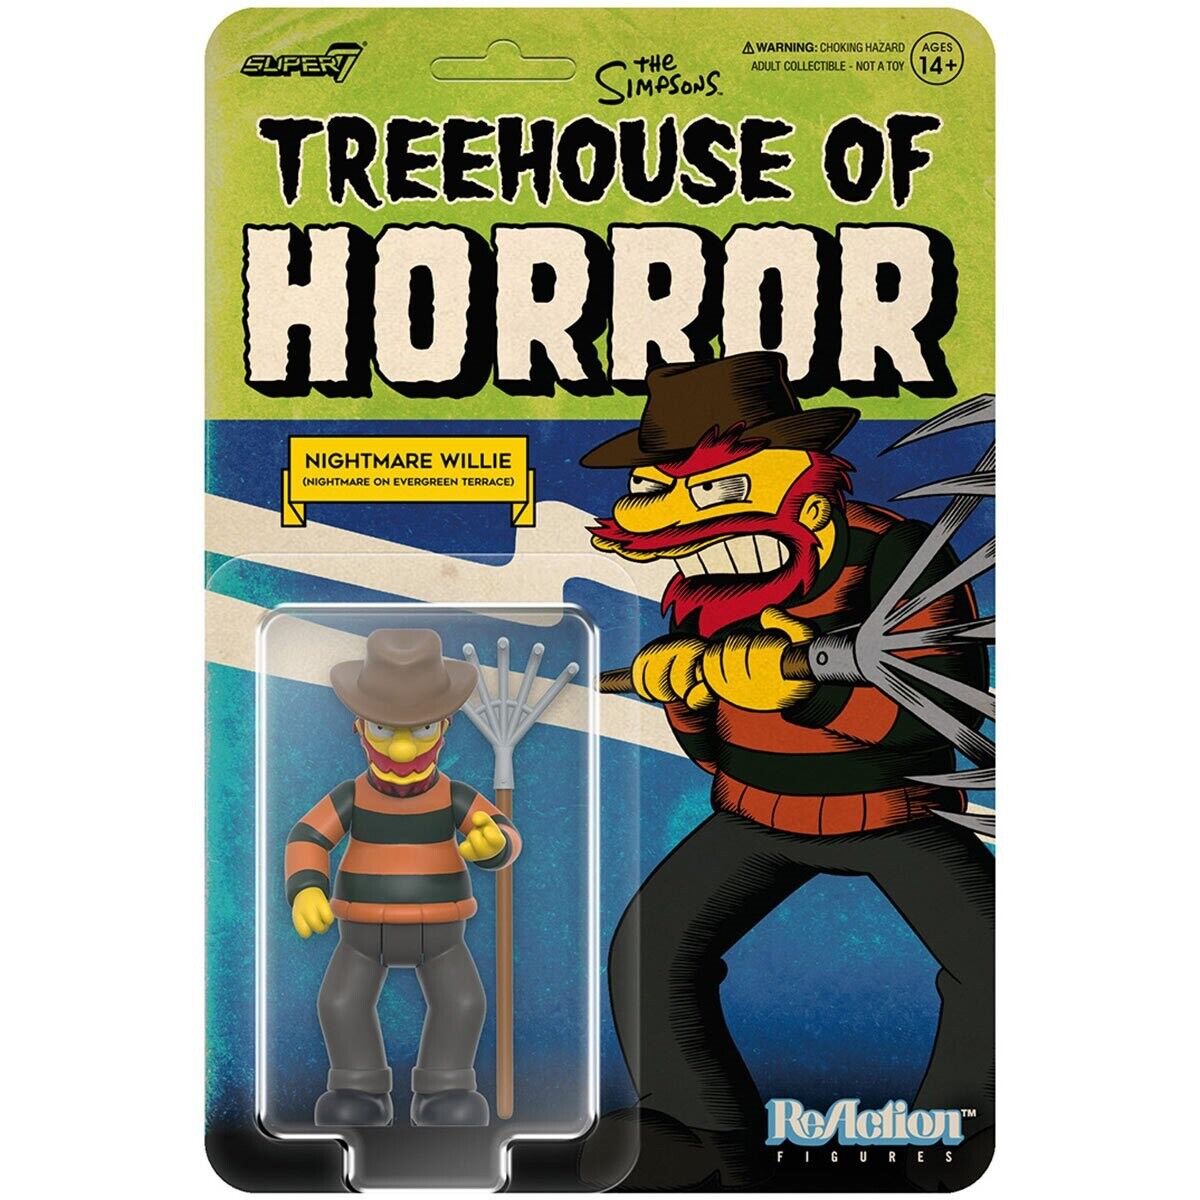 Super7 • Simpsons • Treehouse of Horror • NIGHTMARE WILLIE • 3 ¾ in • Ships Free